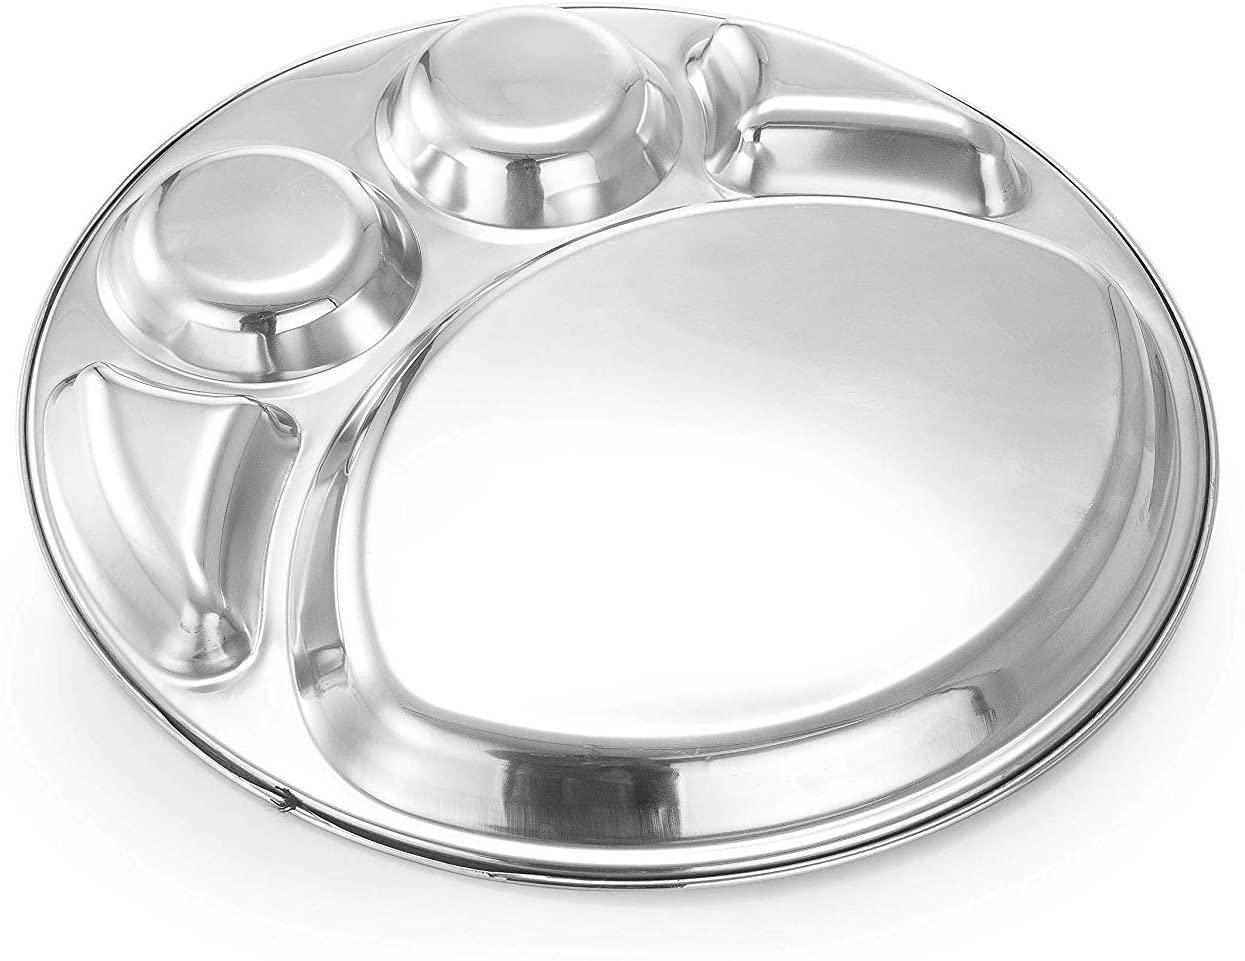 Stainless Steel Round Divided Dinner Plate 5 Sections,Steel Five Compartment Round Thali - www.indiancart.com.au - Plates - - Indian Cart